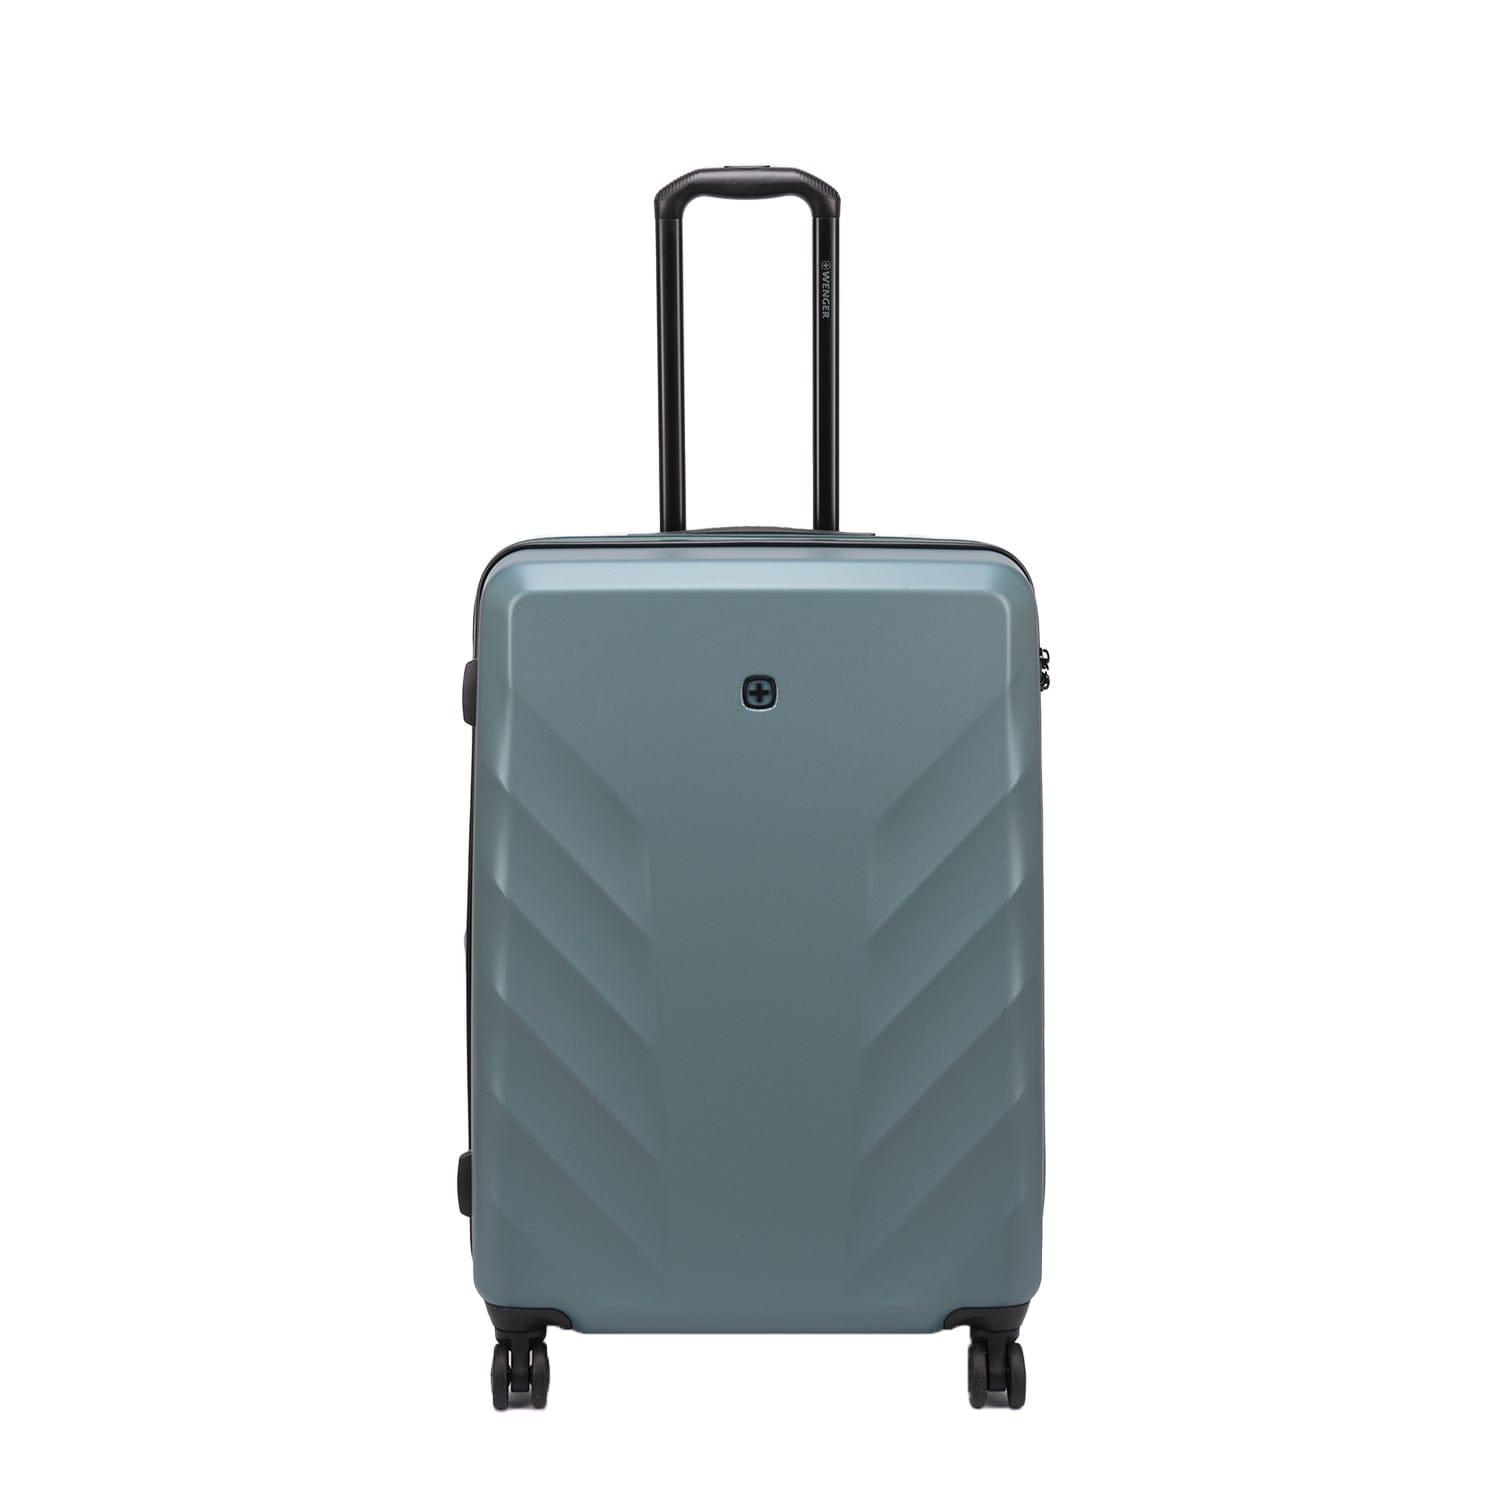 Wenger Motion 69cm Hardside Expandable Check-In Luggage Trolley Green - 612706